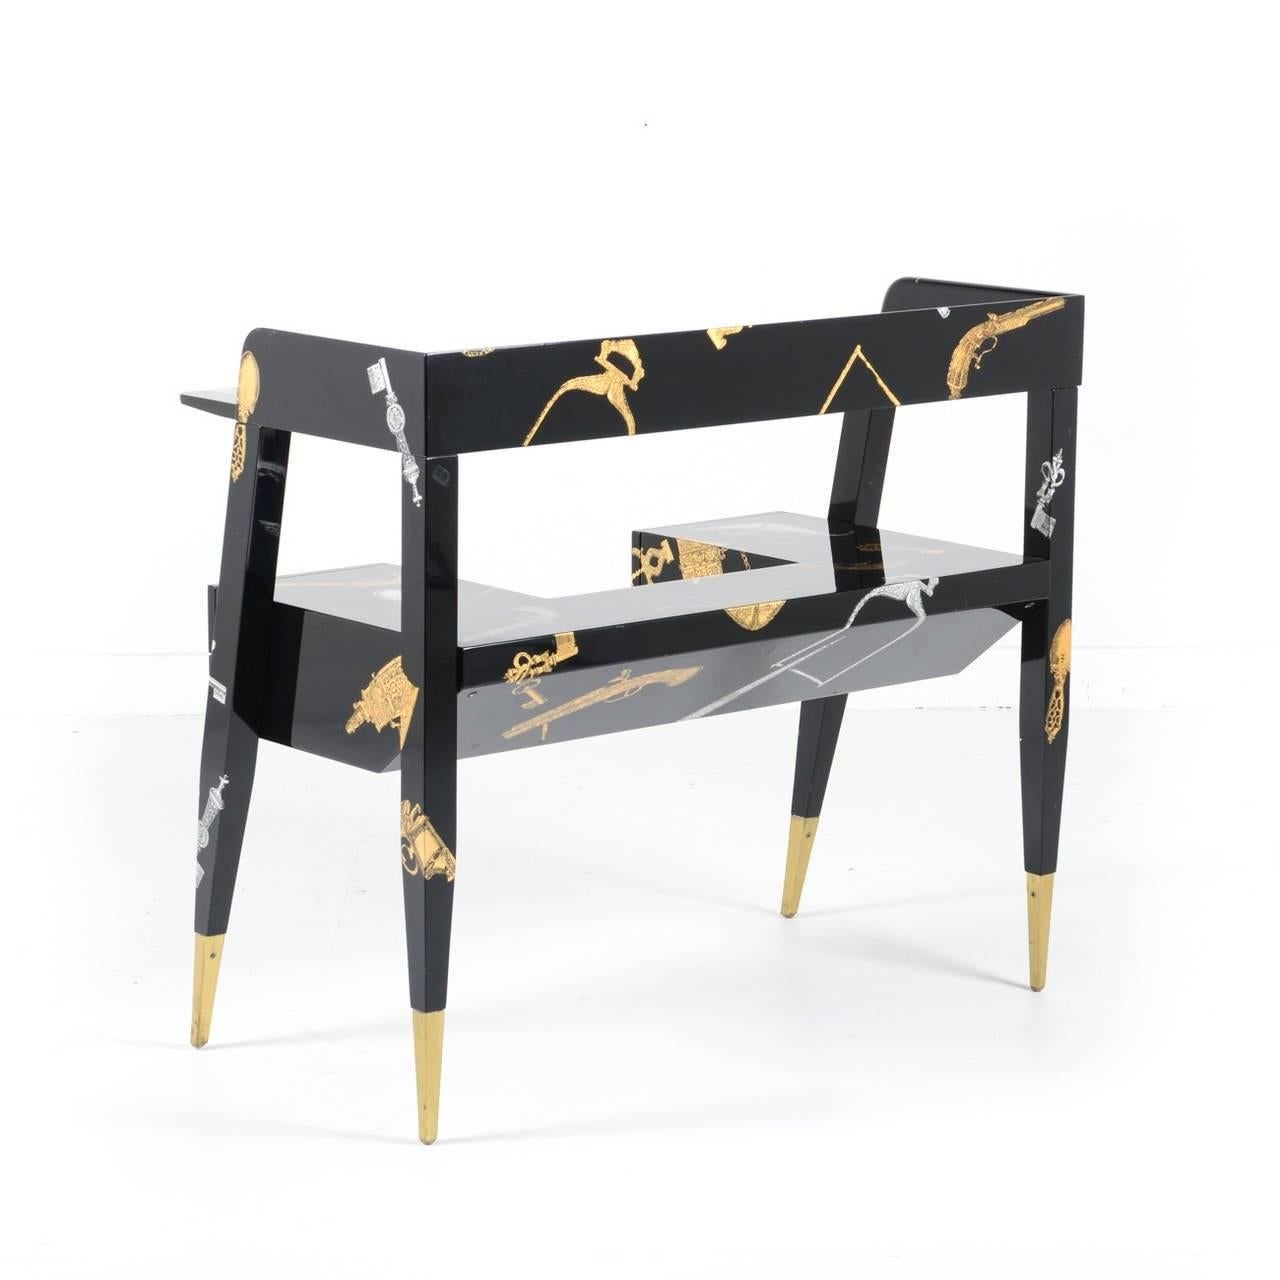 'Chiavi et Pistole' desk designed by Gio Ponti (1891-1979) and Piero Fornasetti (1913-1988). A stunning black lacquer four-drawer desk on brass sabots. Printed with pistol and key motif in silver and gold. Marked 